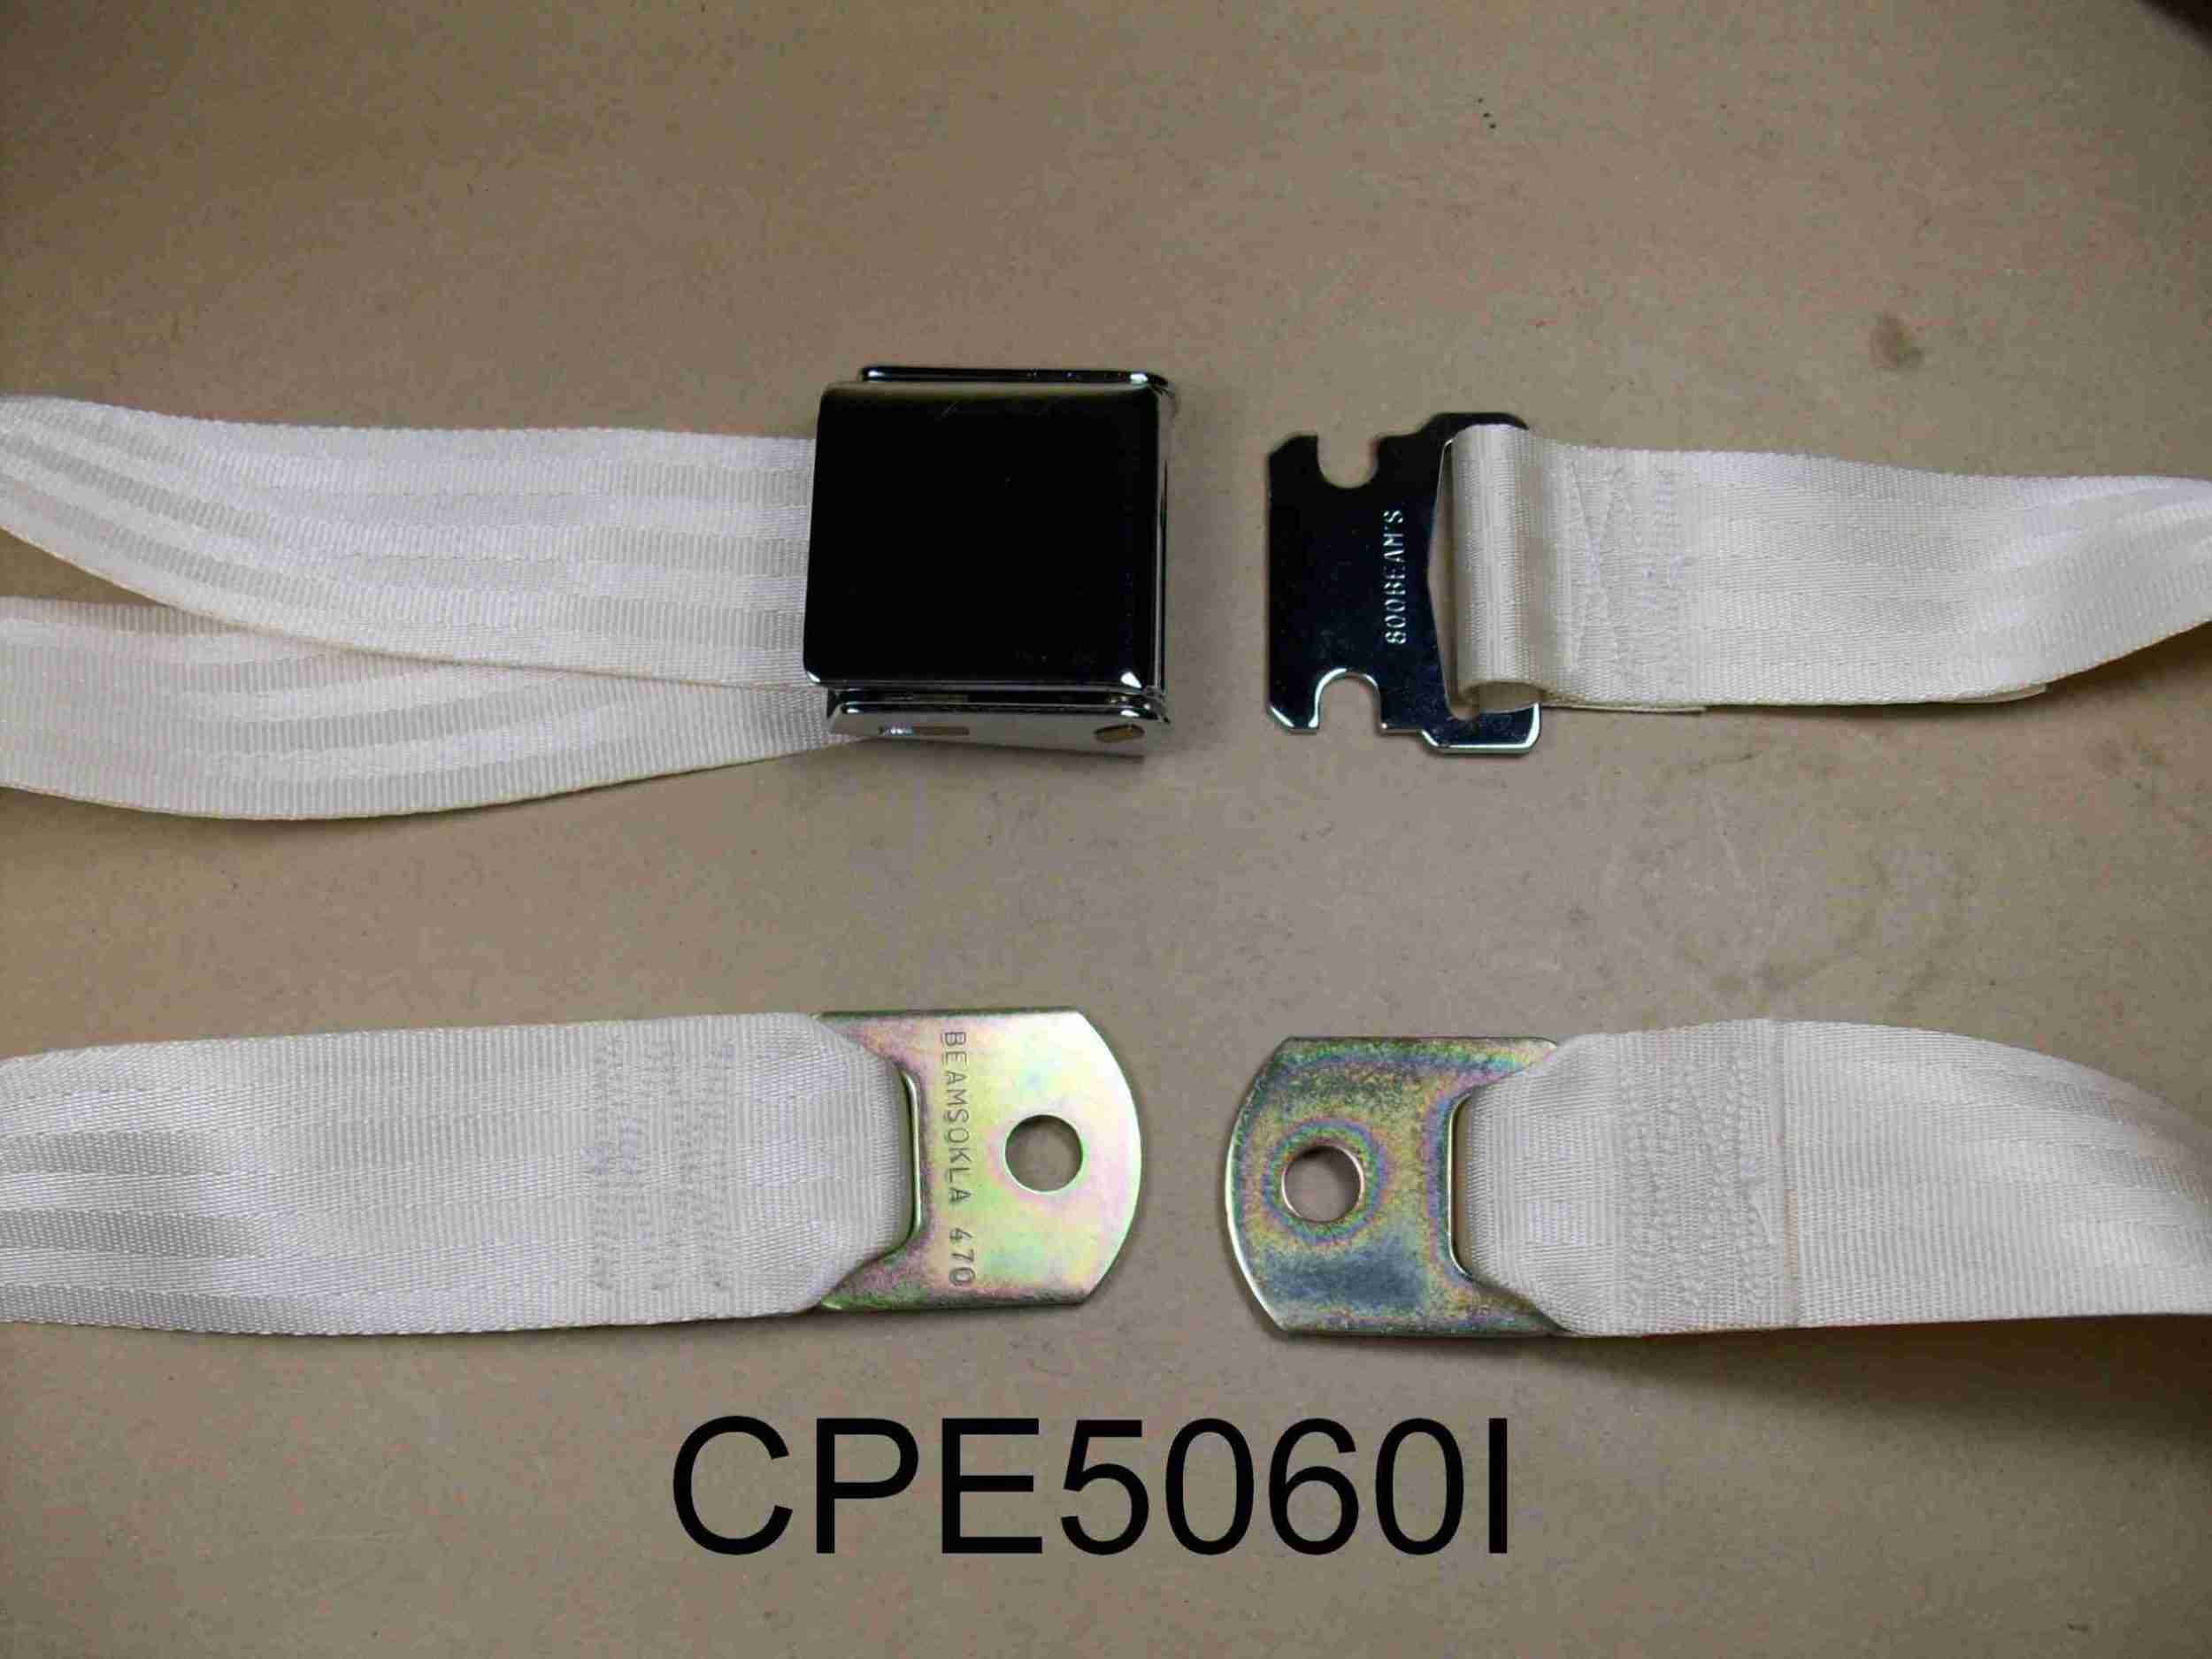 1926-65 60" Ivory Seat Belt w/ Chrome Aircraft-Style Buckle, 2-point non-retractable lap belt, comes w/ hardware